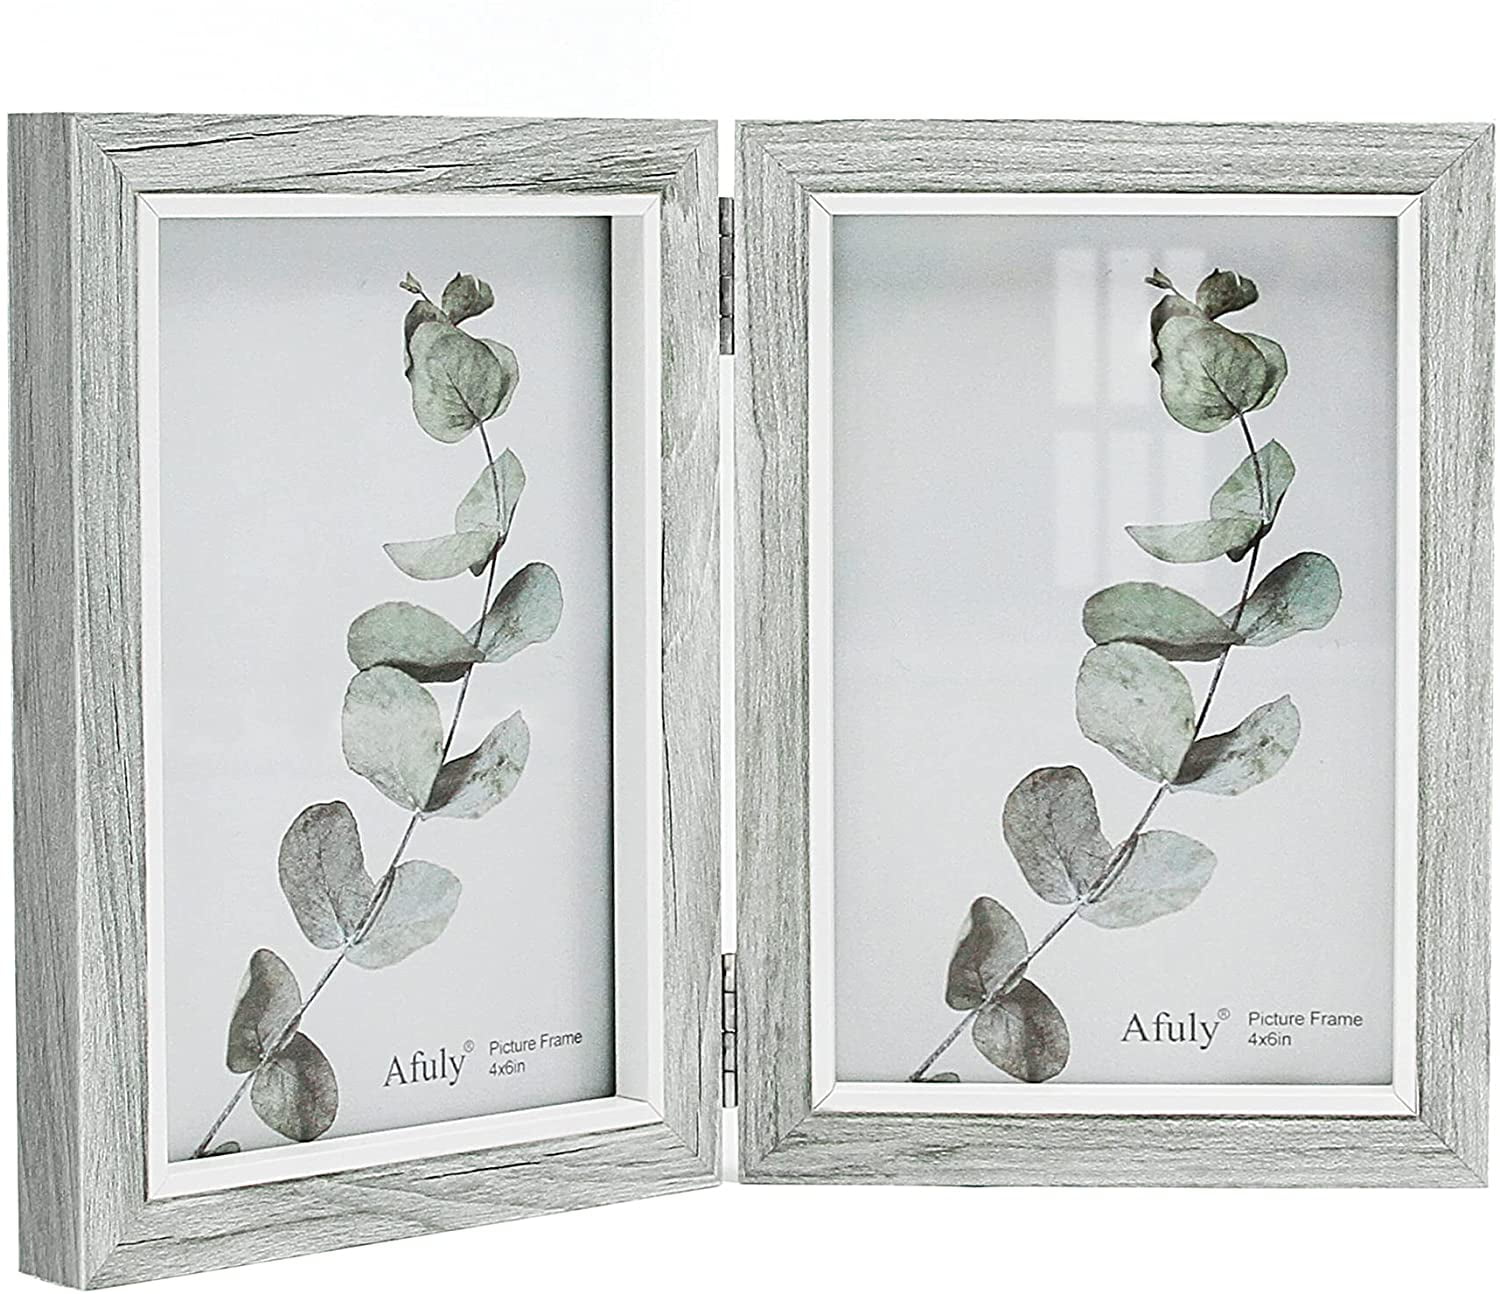  Picture Frames - White / Picture Frames / Photo Albums, Frames  & Accessories: Home & Kitchen